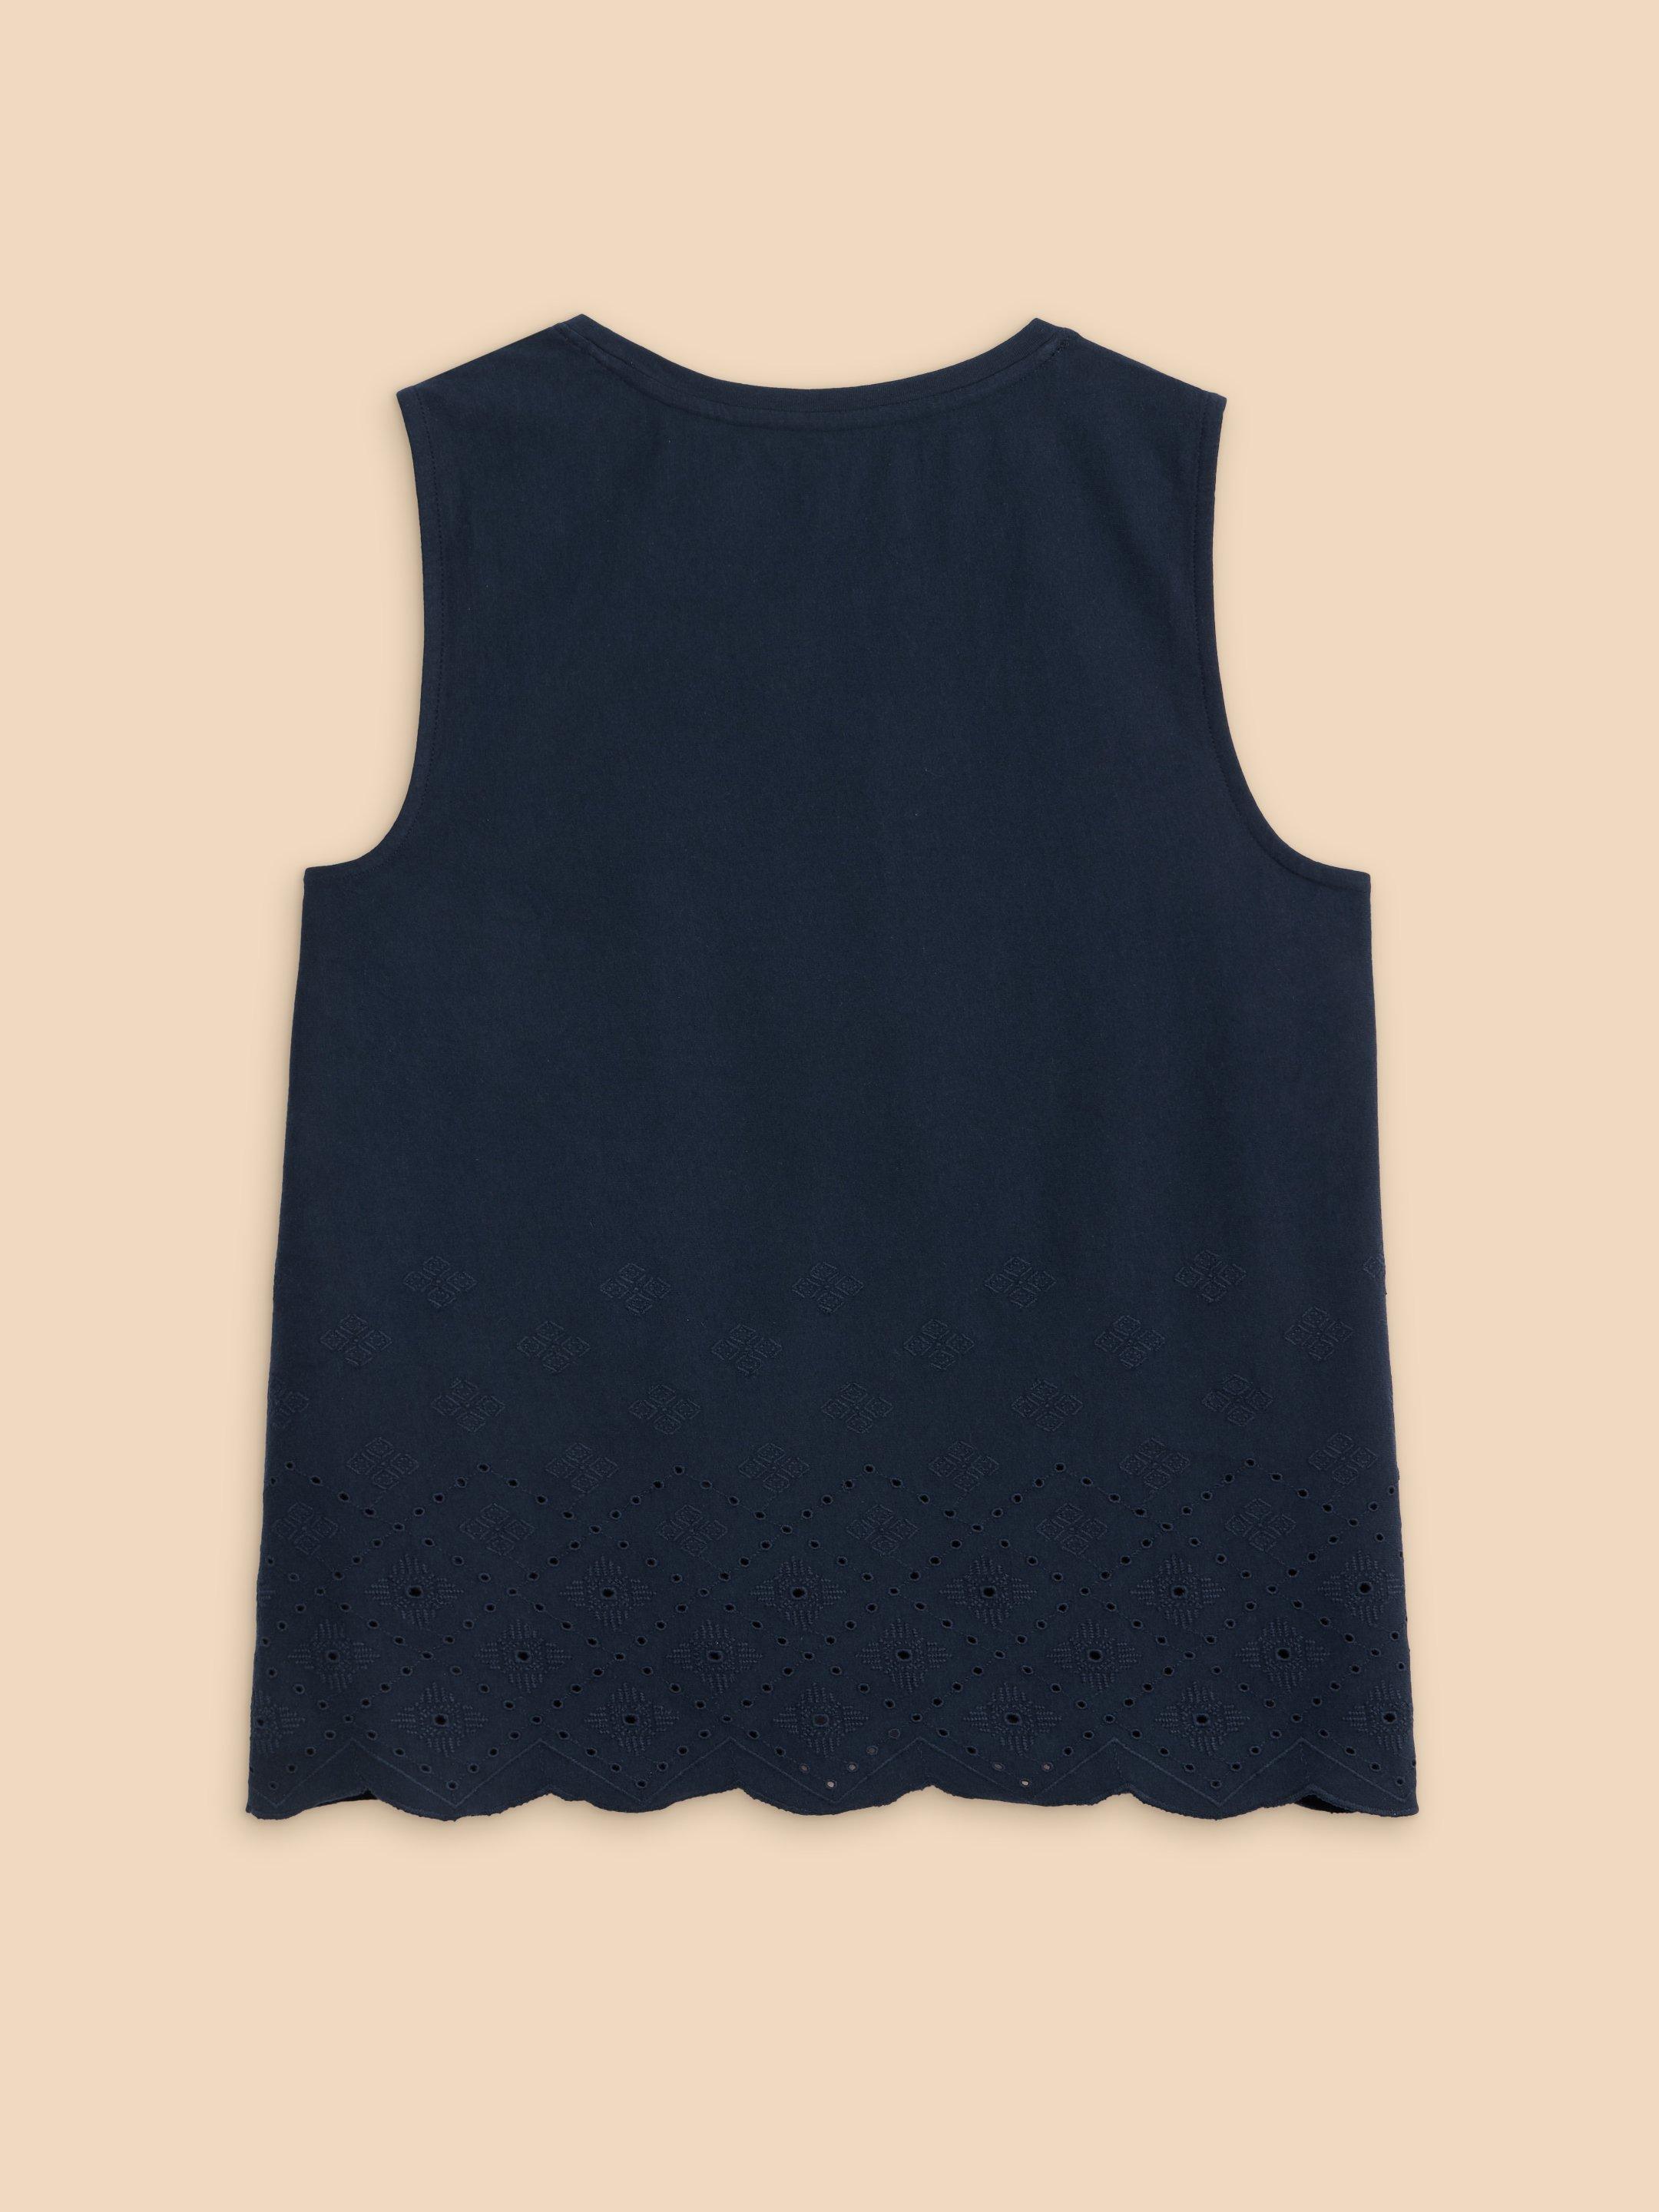 SILVIA CUT OUT VEST in FR NAVY - FLAT BACK